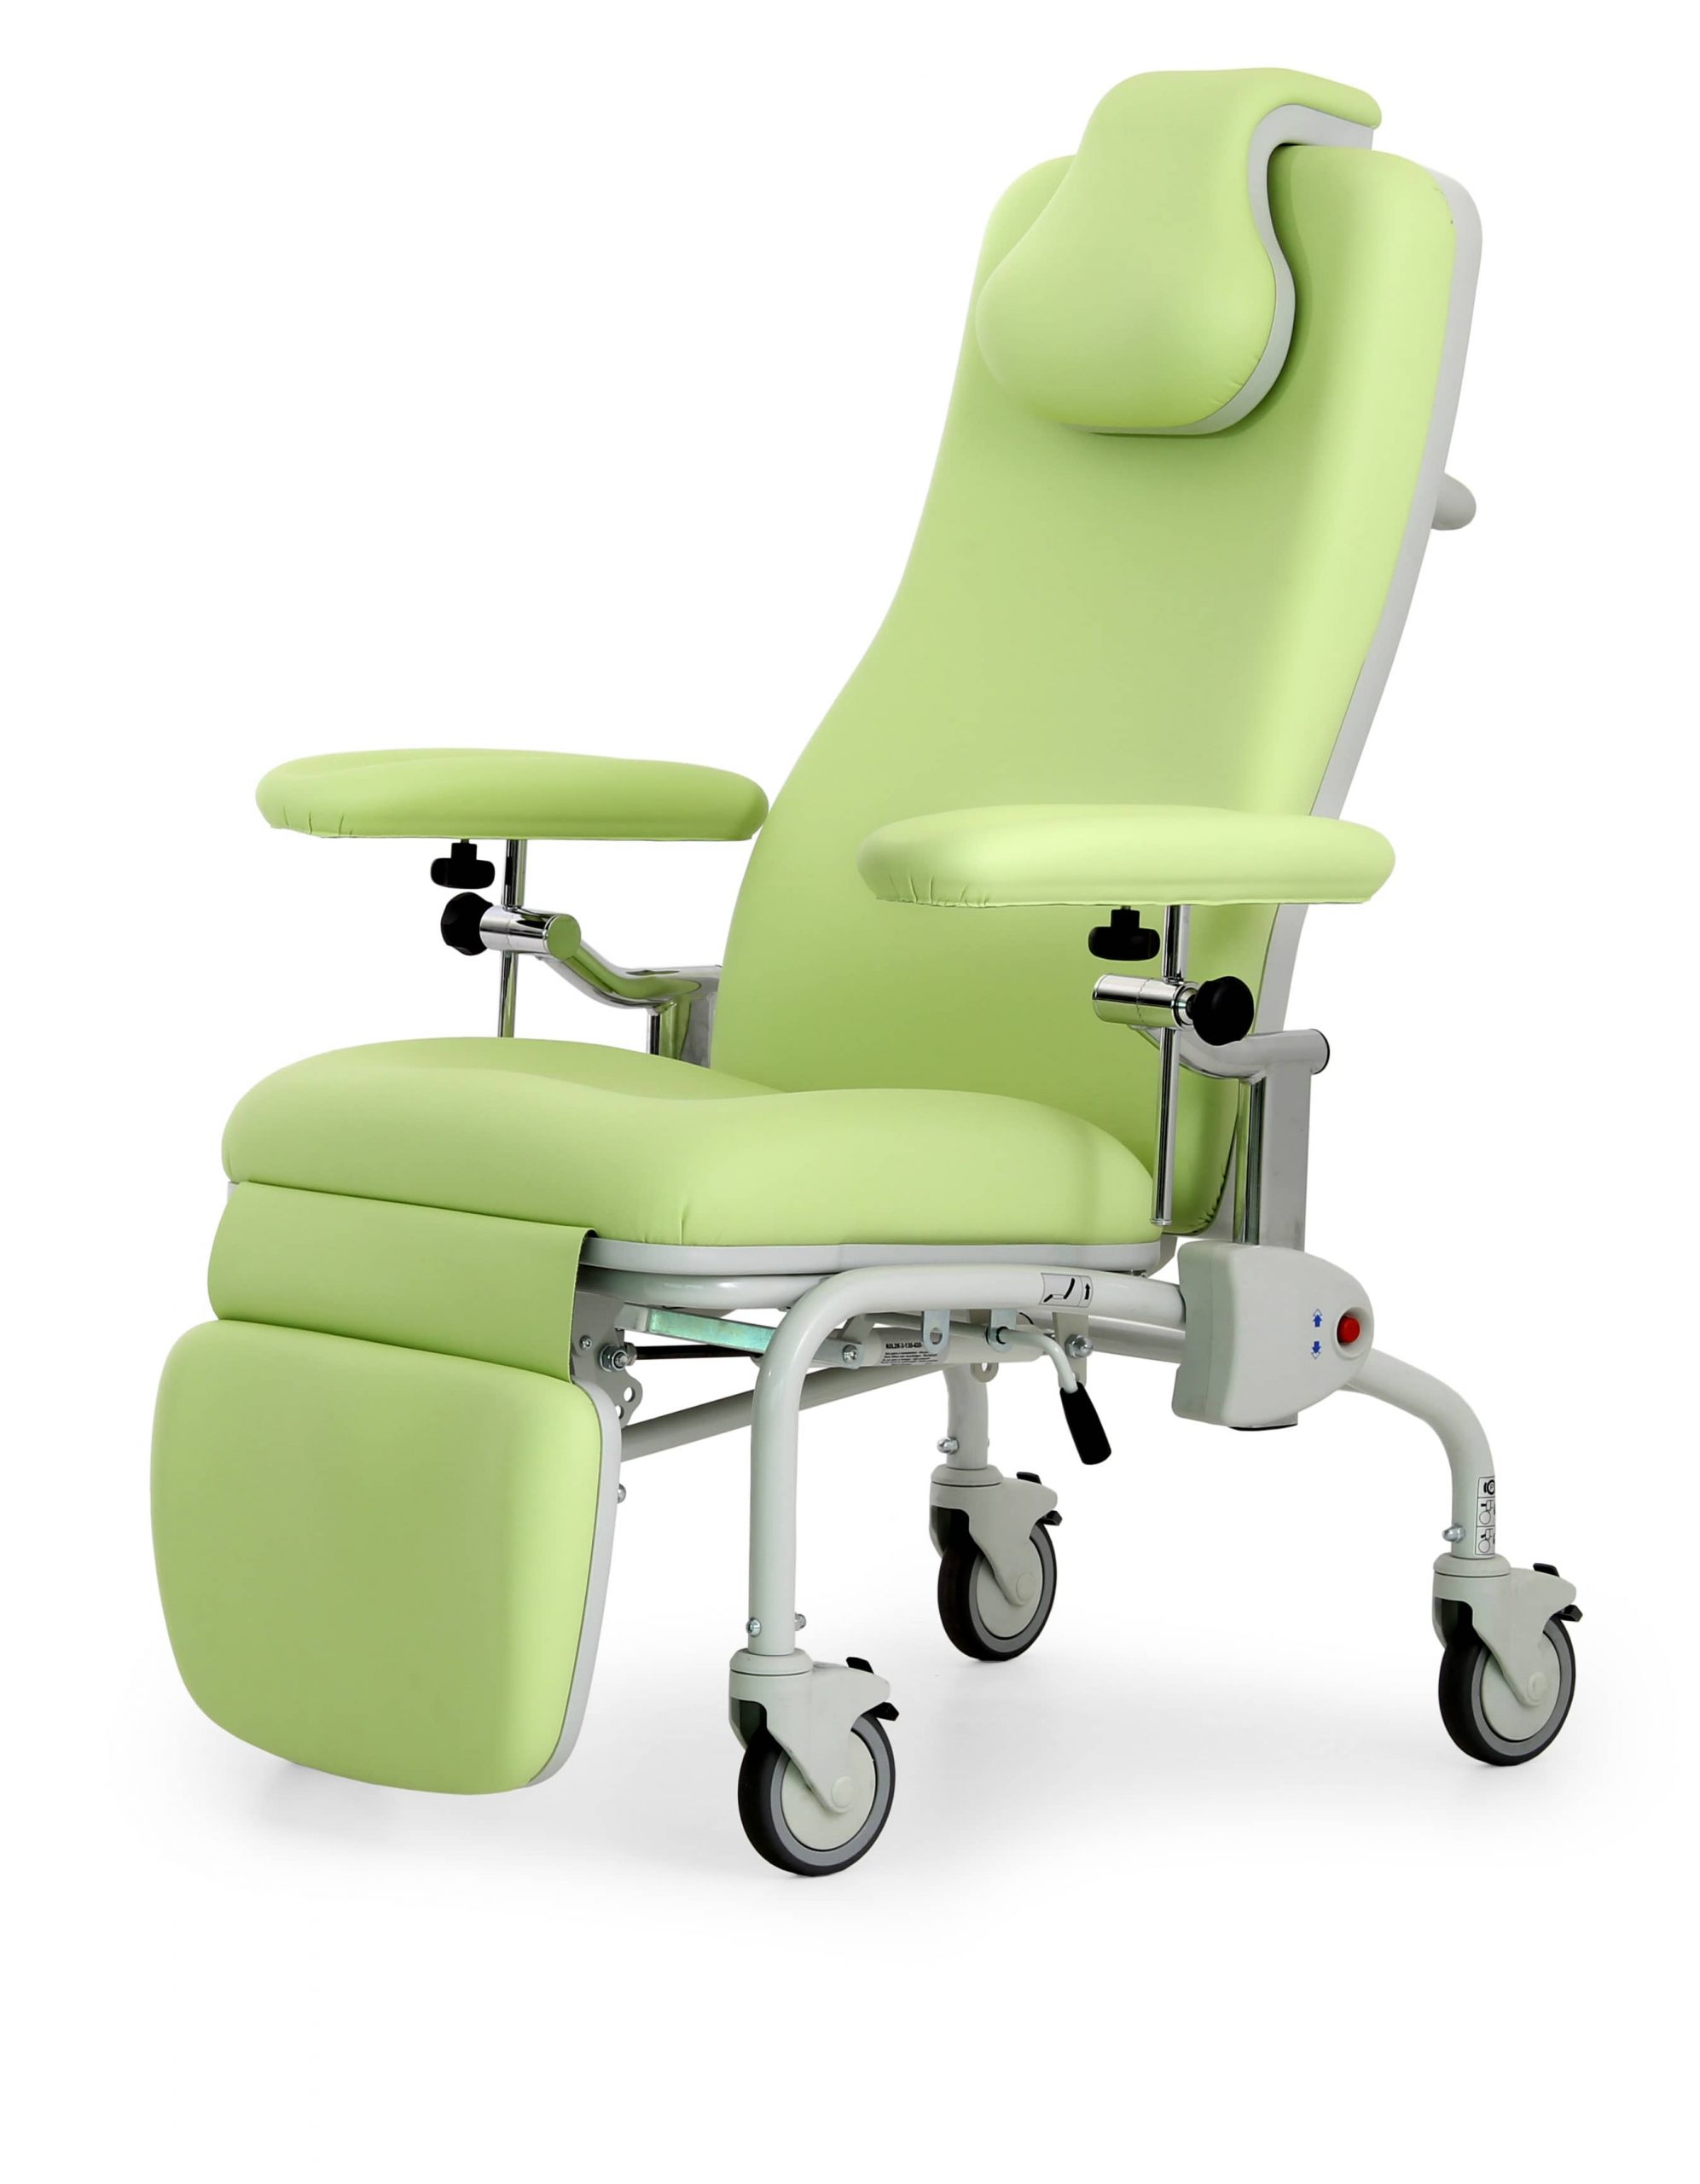 vaccination chair - fixed height